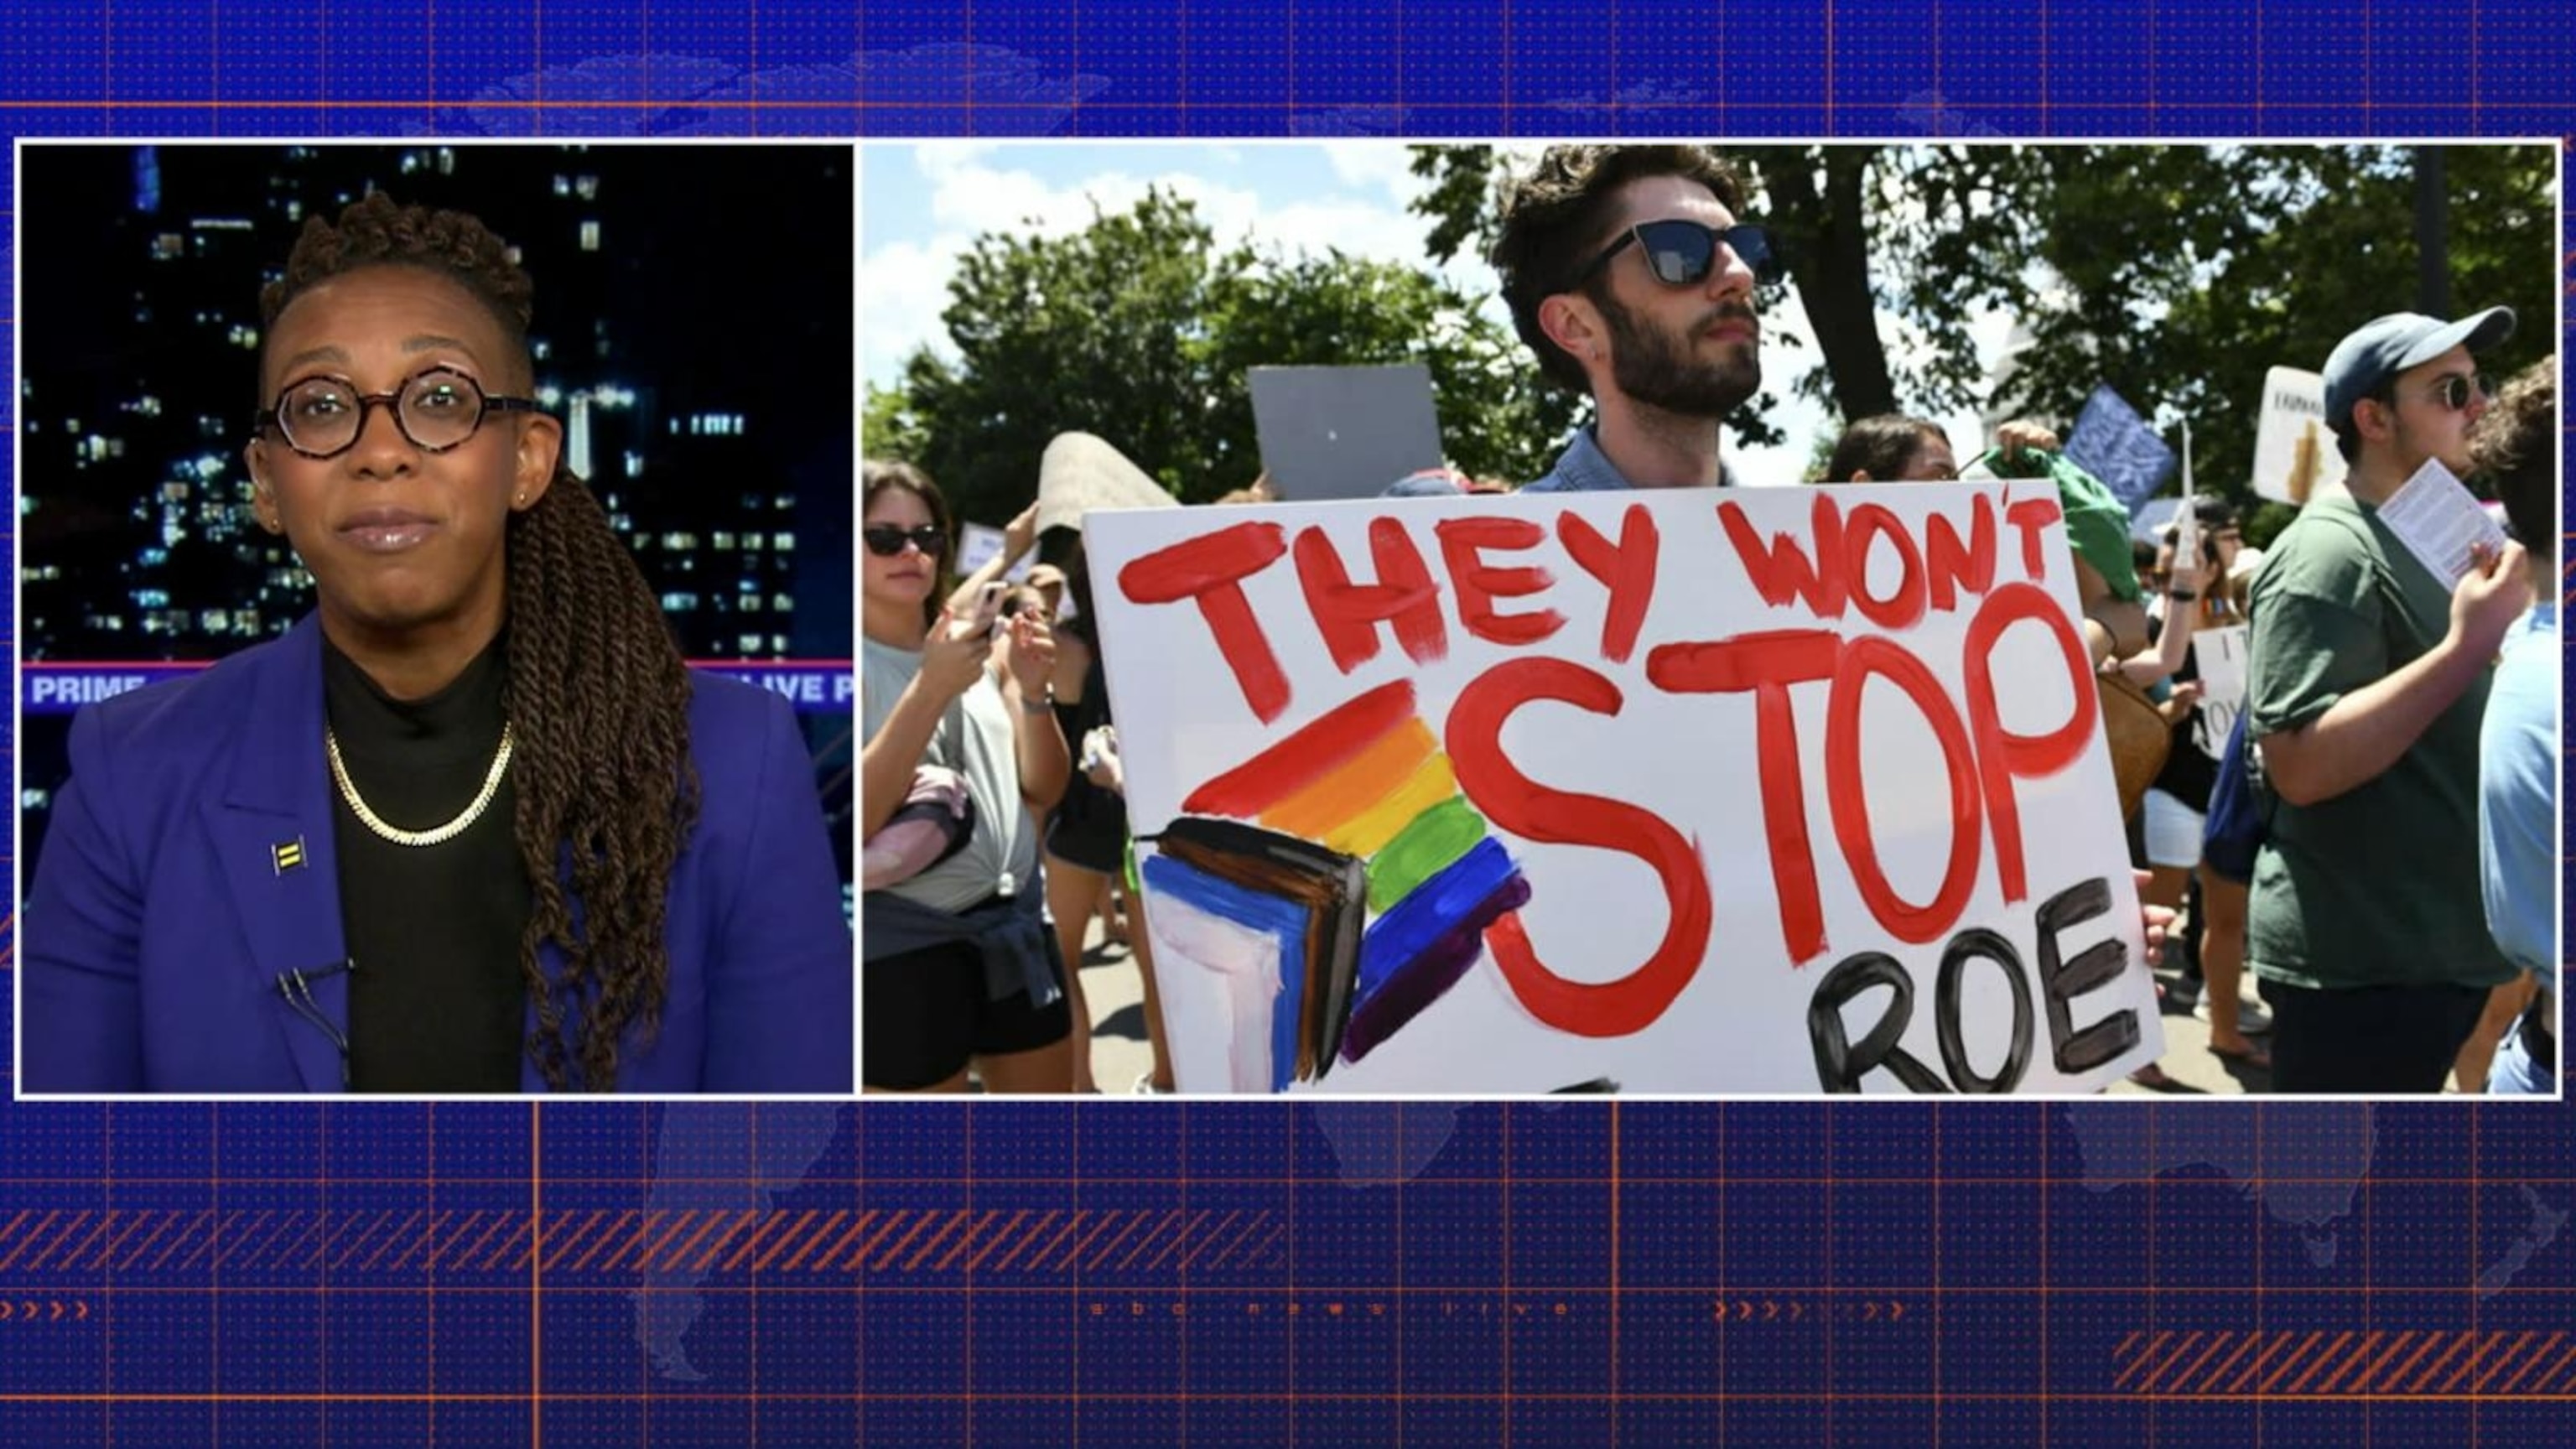 VIDEO: The status of the fight for LGBTQ rights